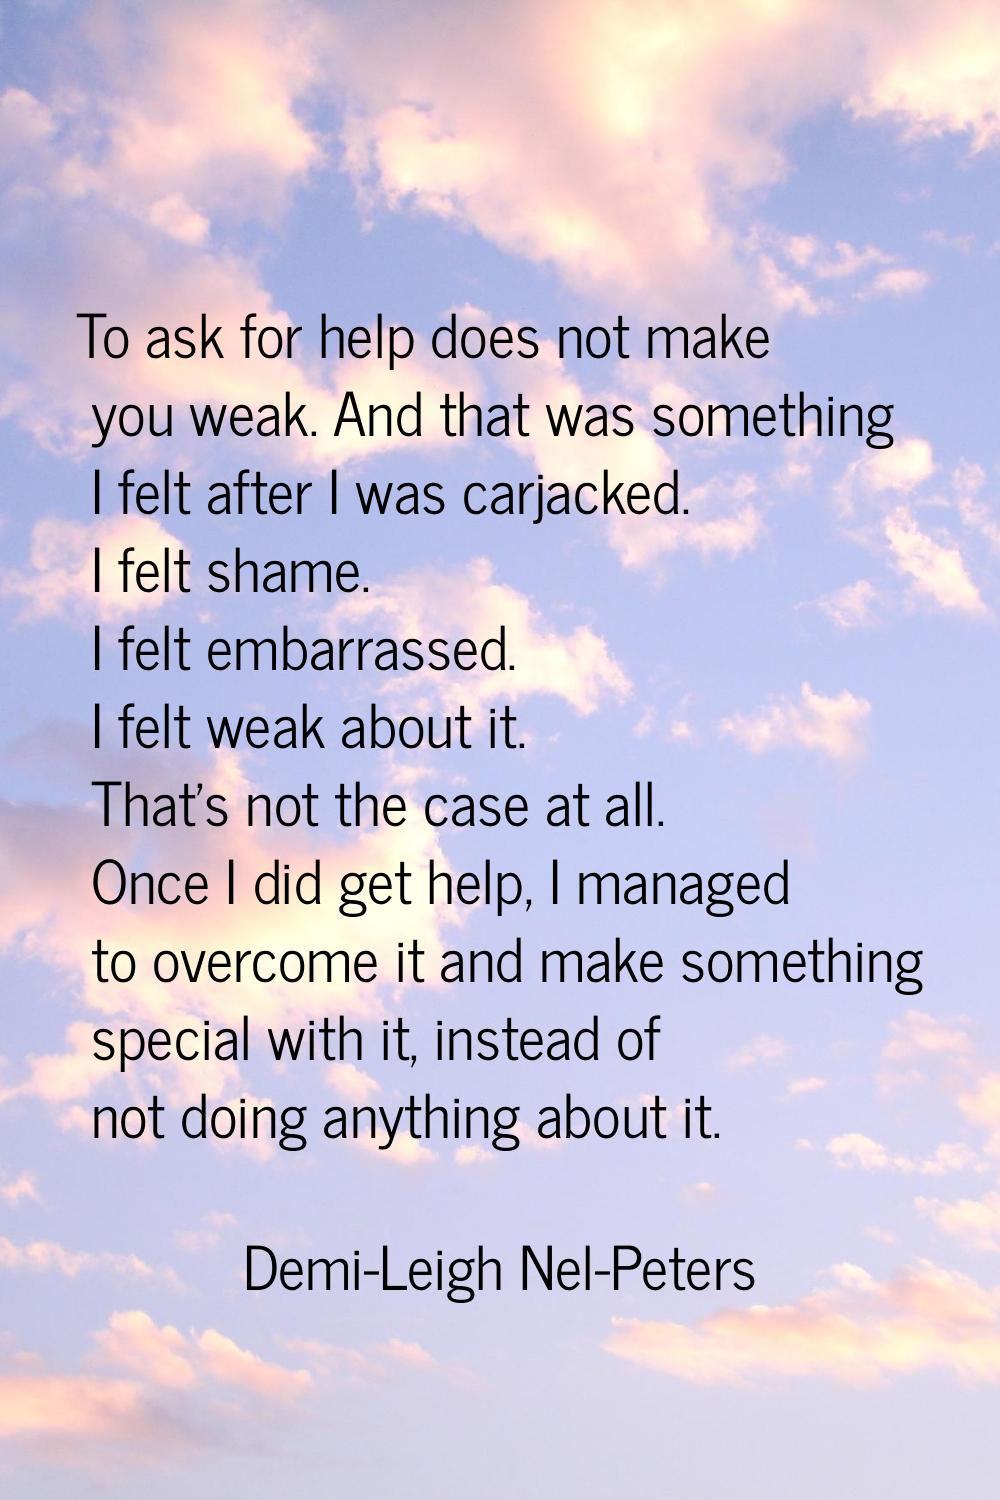 To ask for help does not make you weak. And that was something I felt after I was carjacked. I felt